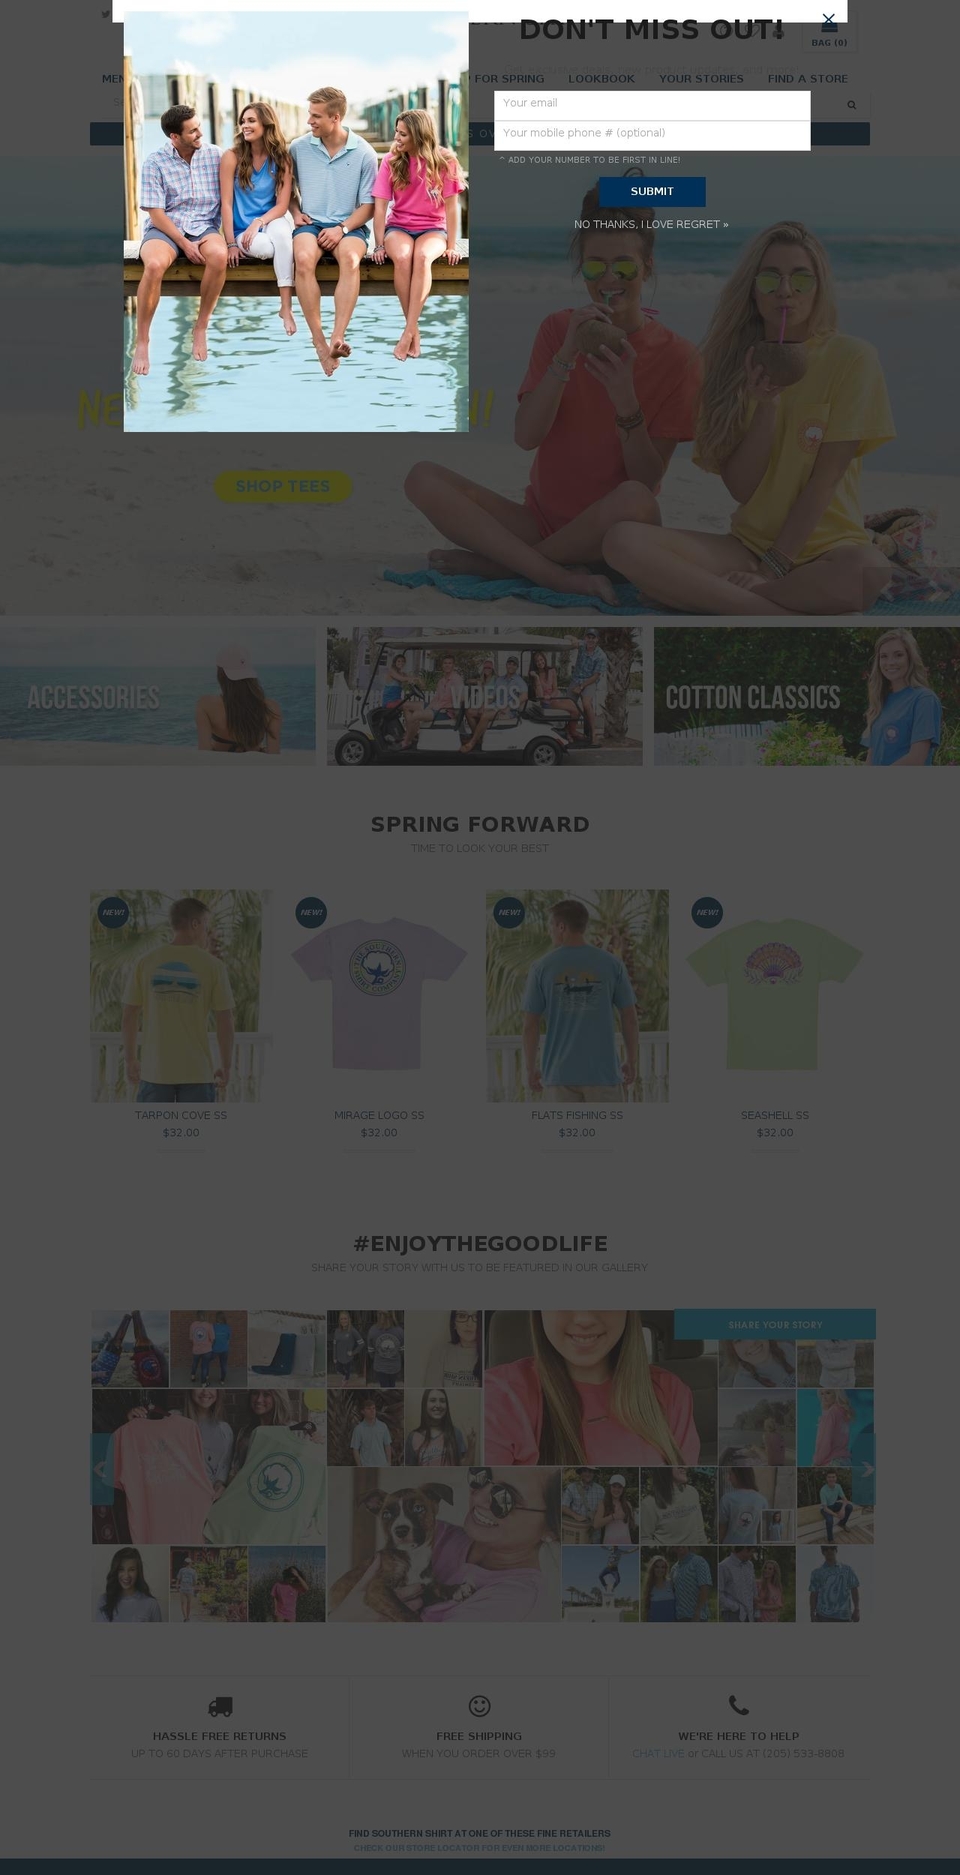 Launch Shopify theme site example southernshirt.com